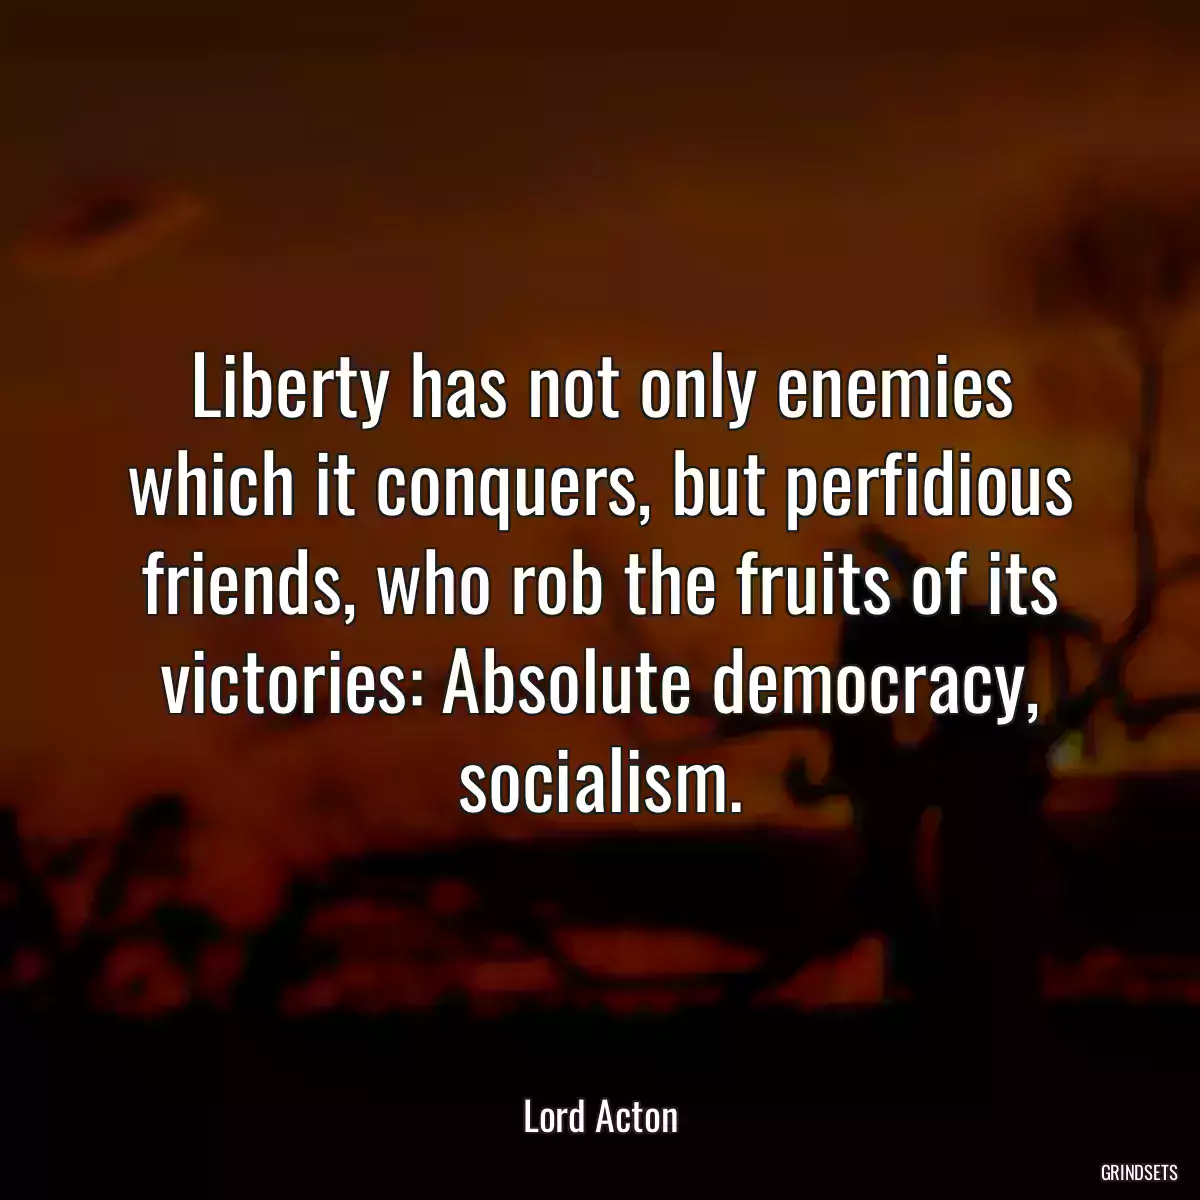 Liberty has not only enemies which it conquers, but perfidious friends, who rob the fruits of its victories: Absolute democracy, socialism.